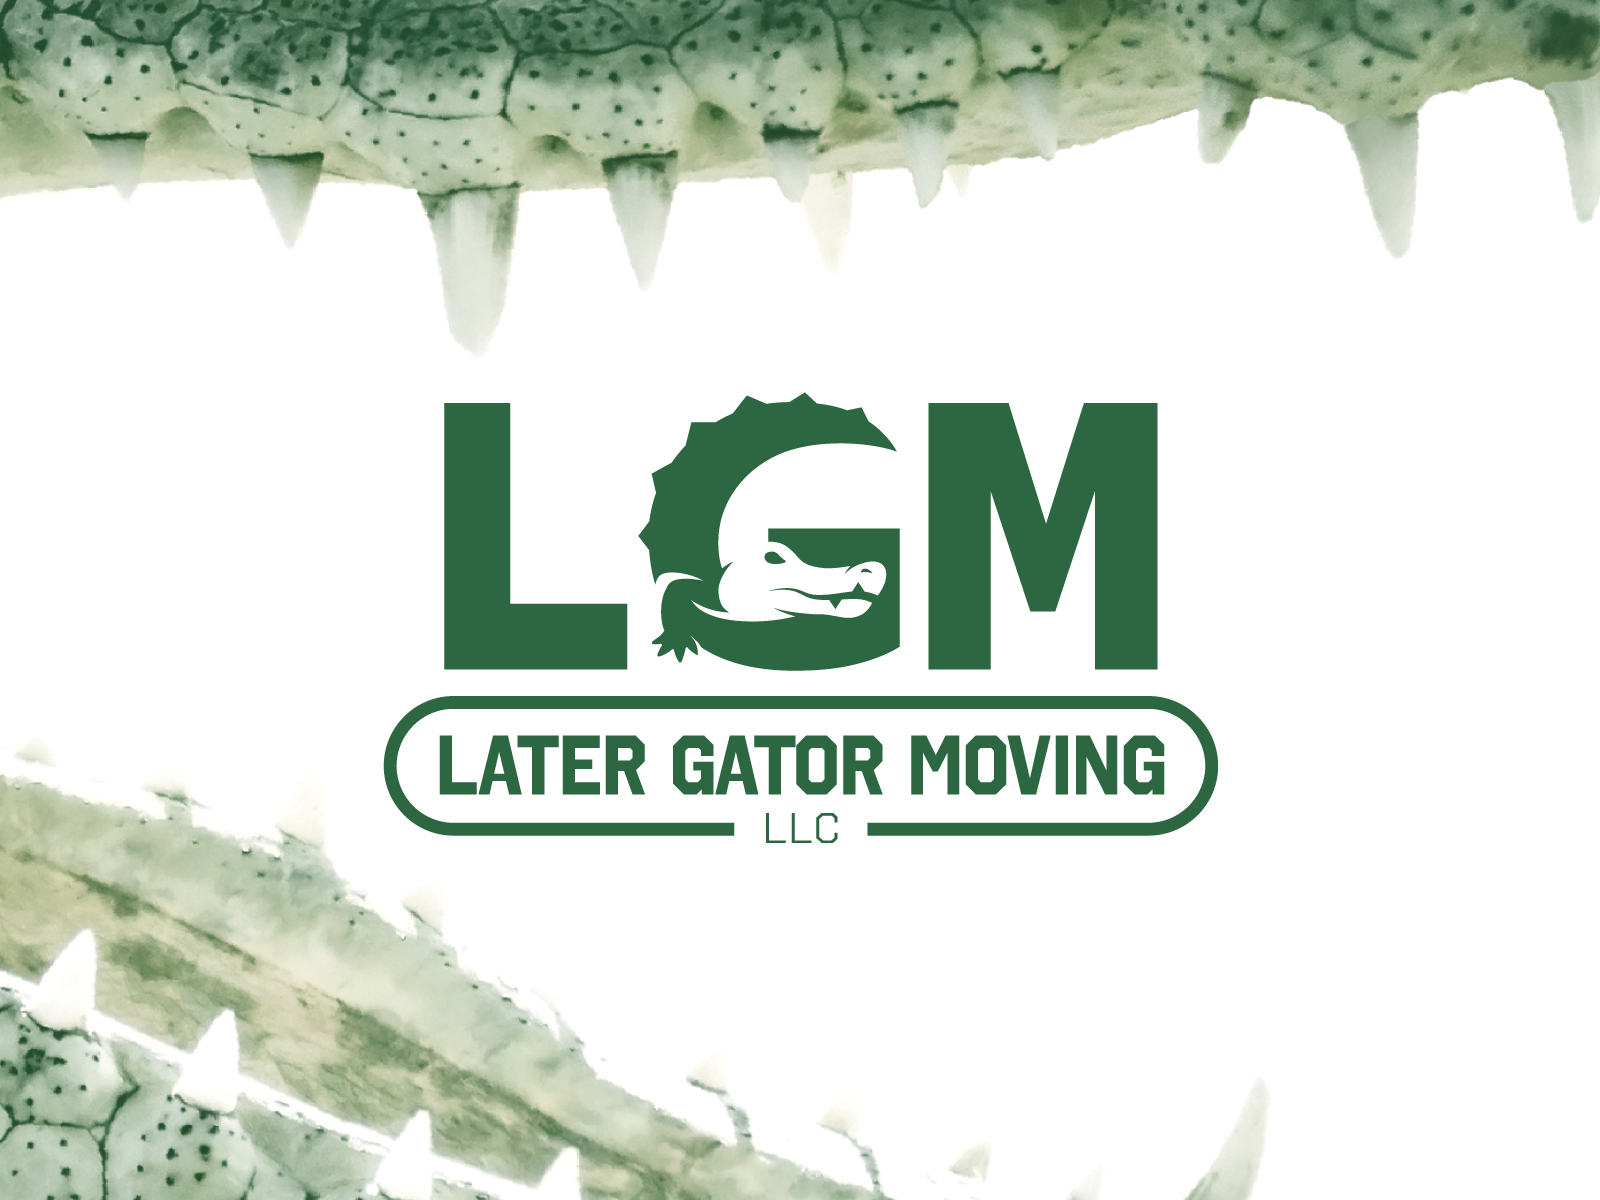 Later Gator Moving